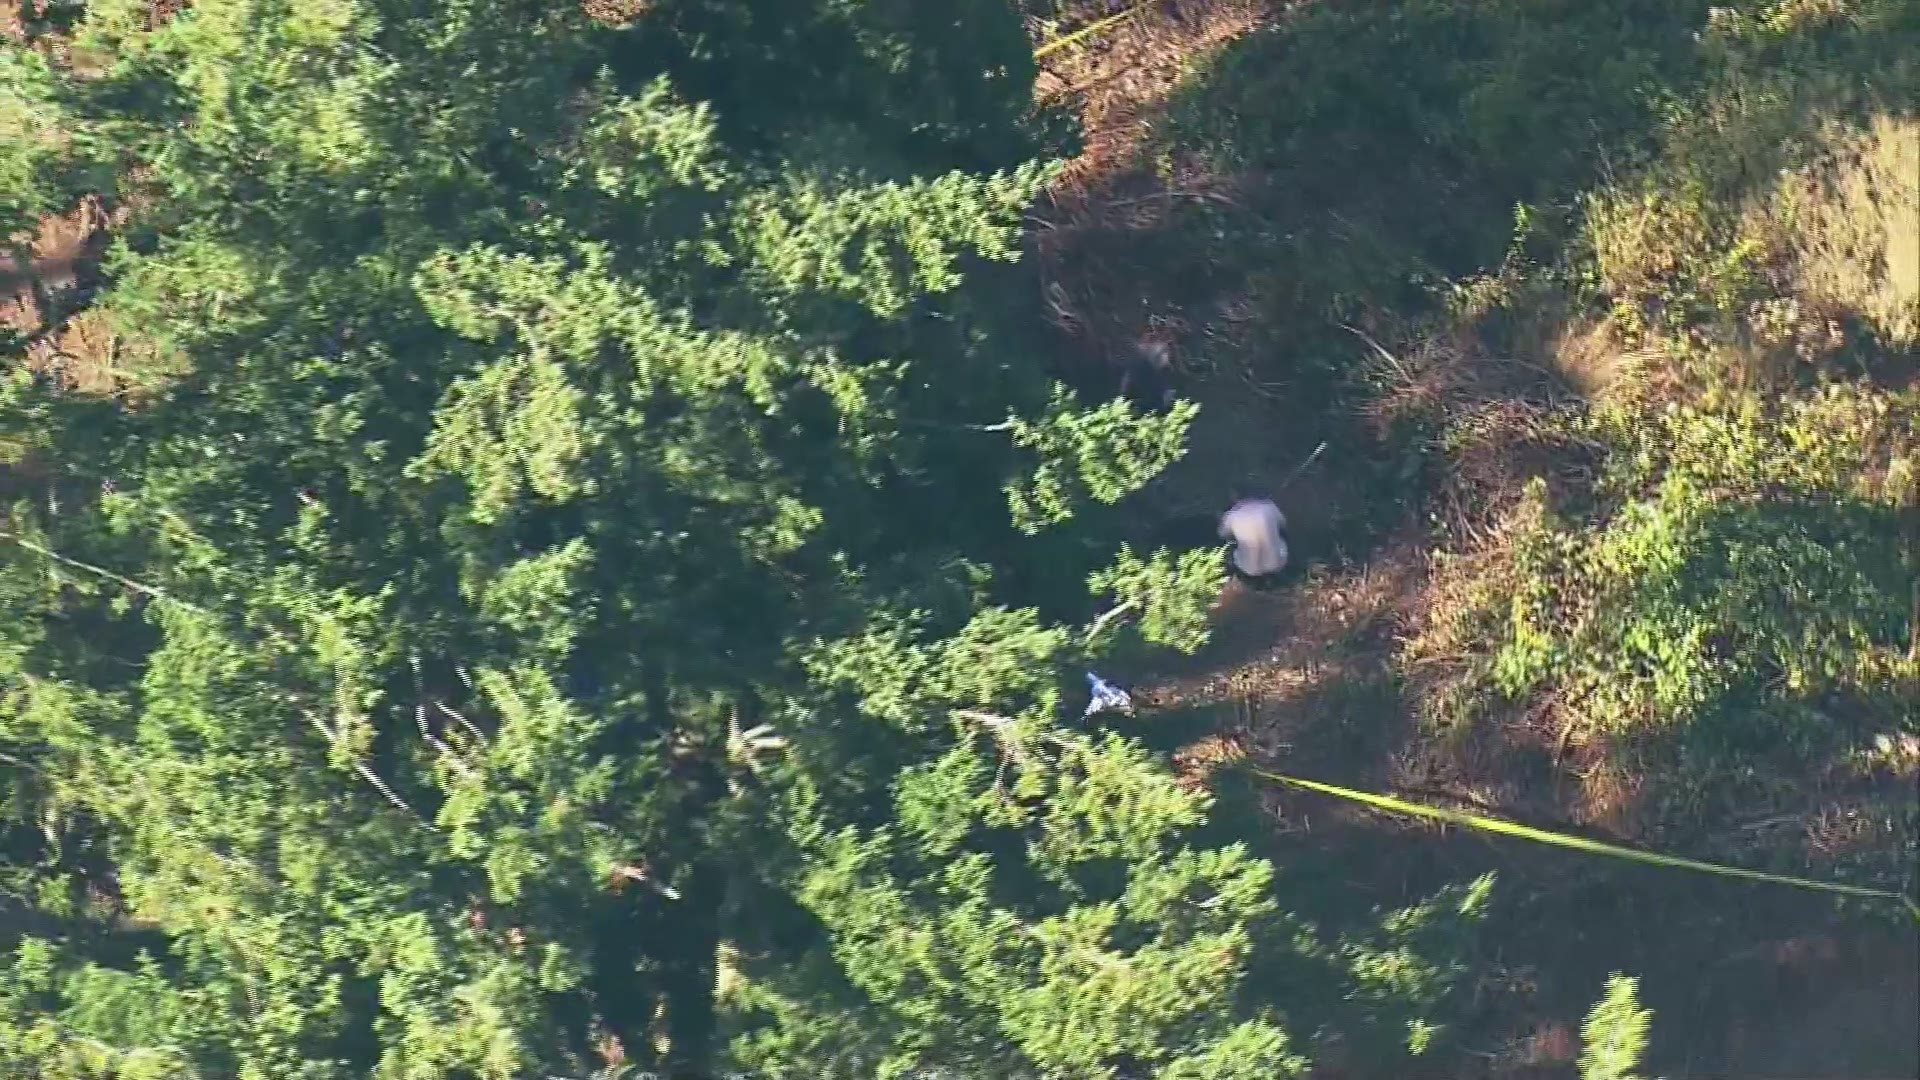 Construction workers discovered human remains at a vacant site near Lake Tapps.